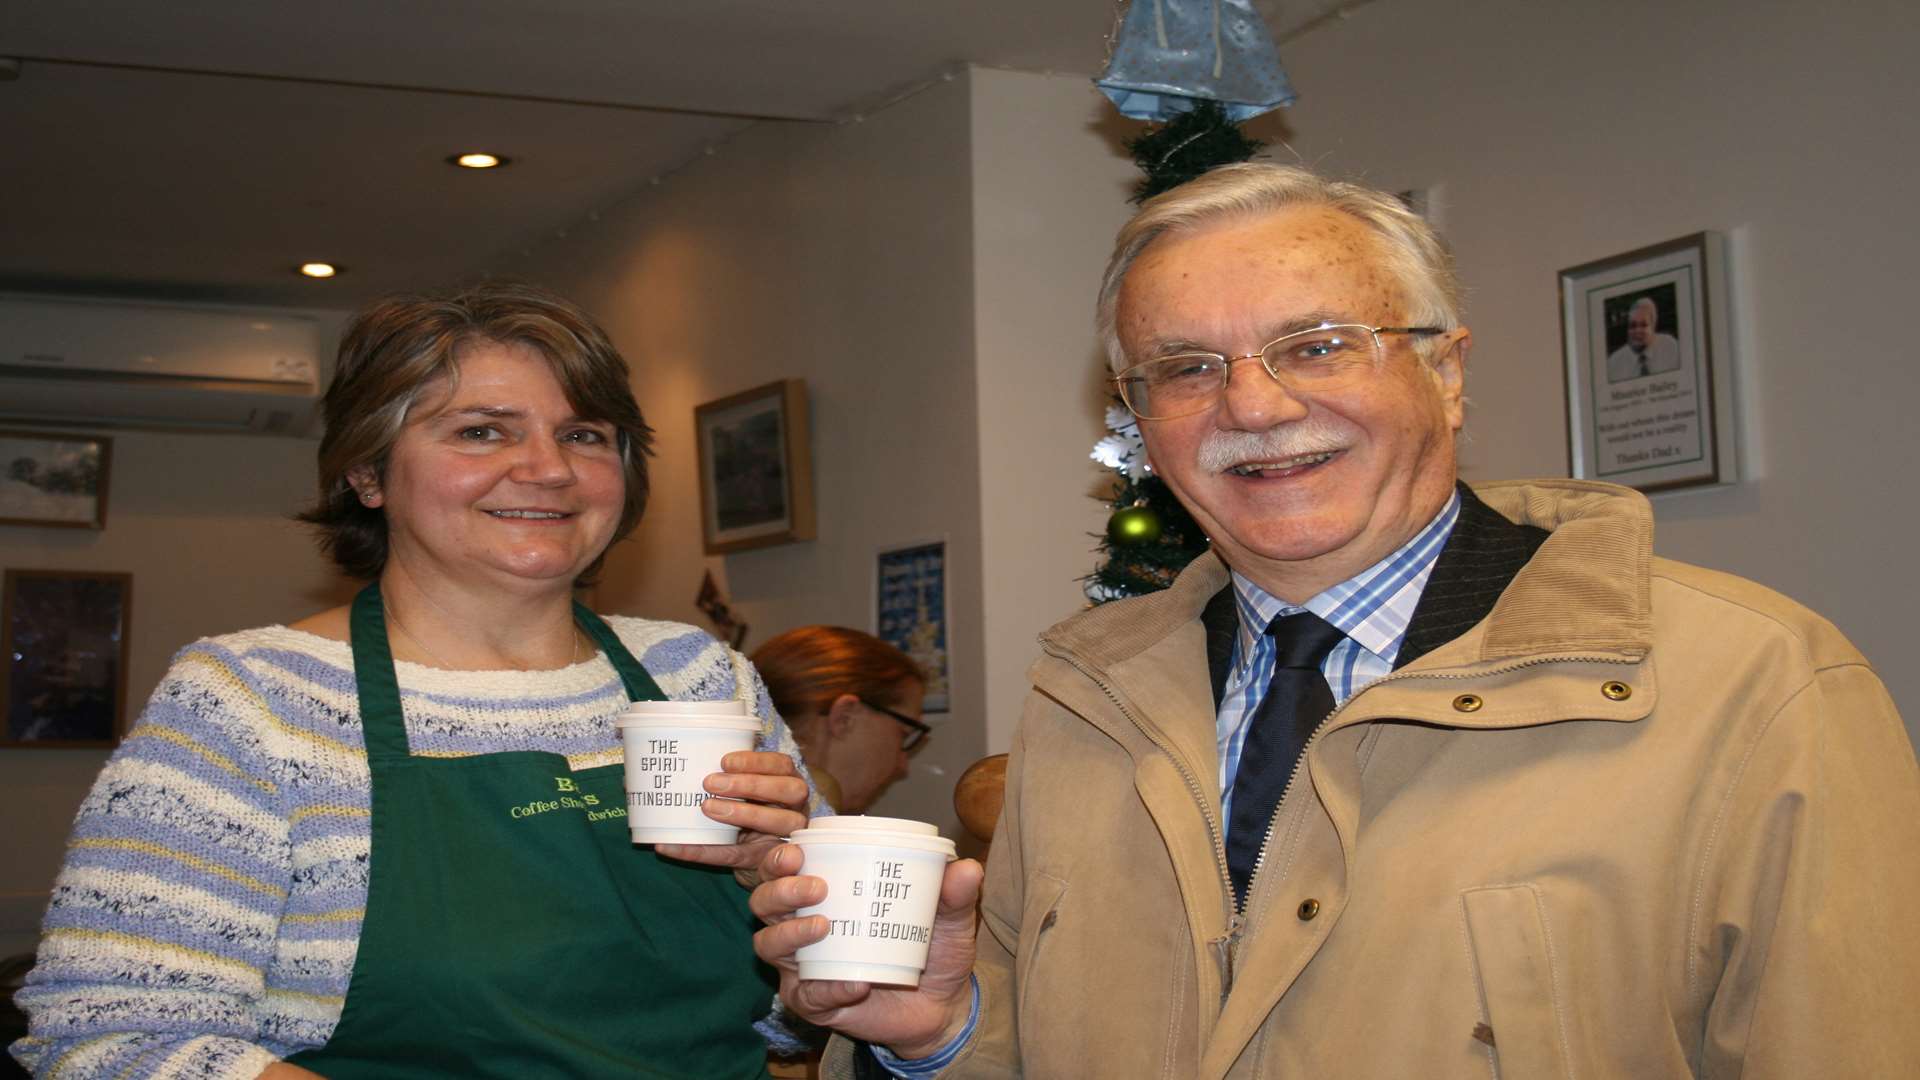 Sally Reeve, manager of Baileys coffee shop in Sittingbourne with Cllr Mike Cosgrove